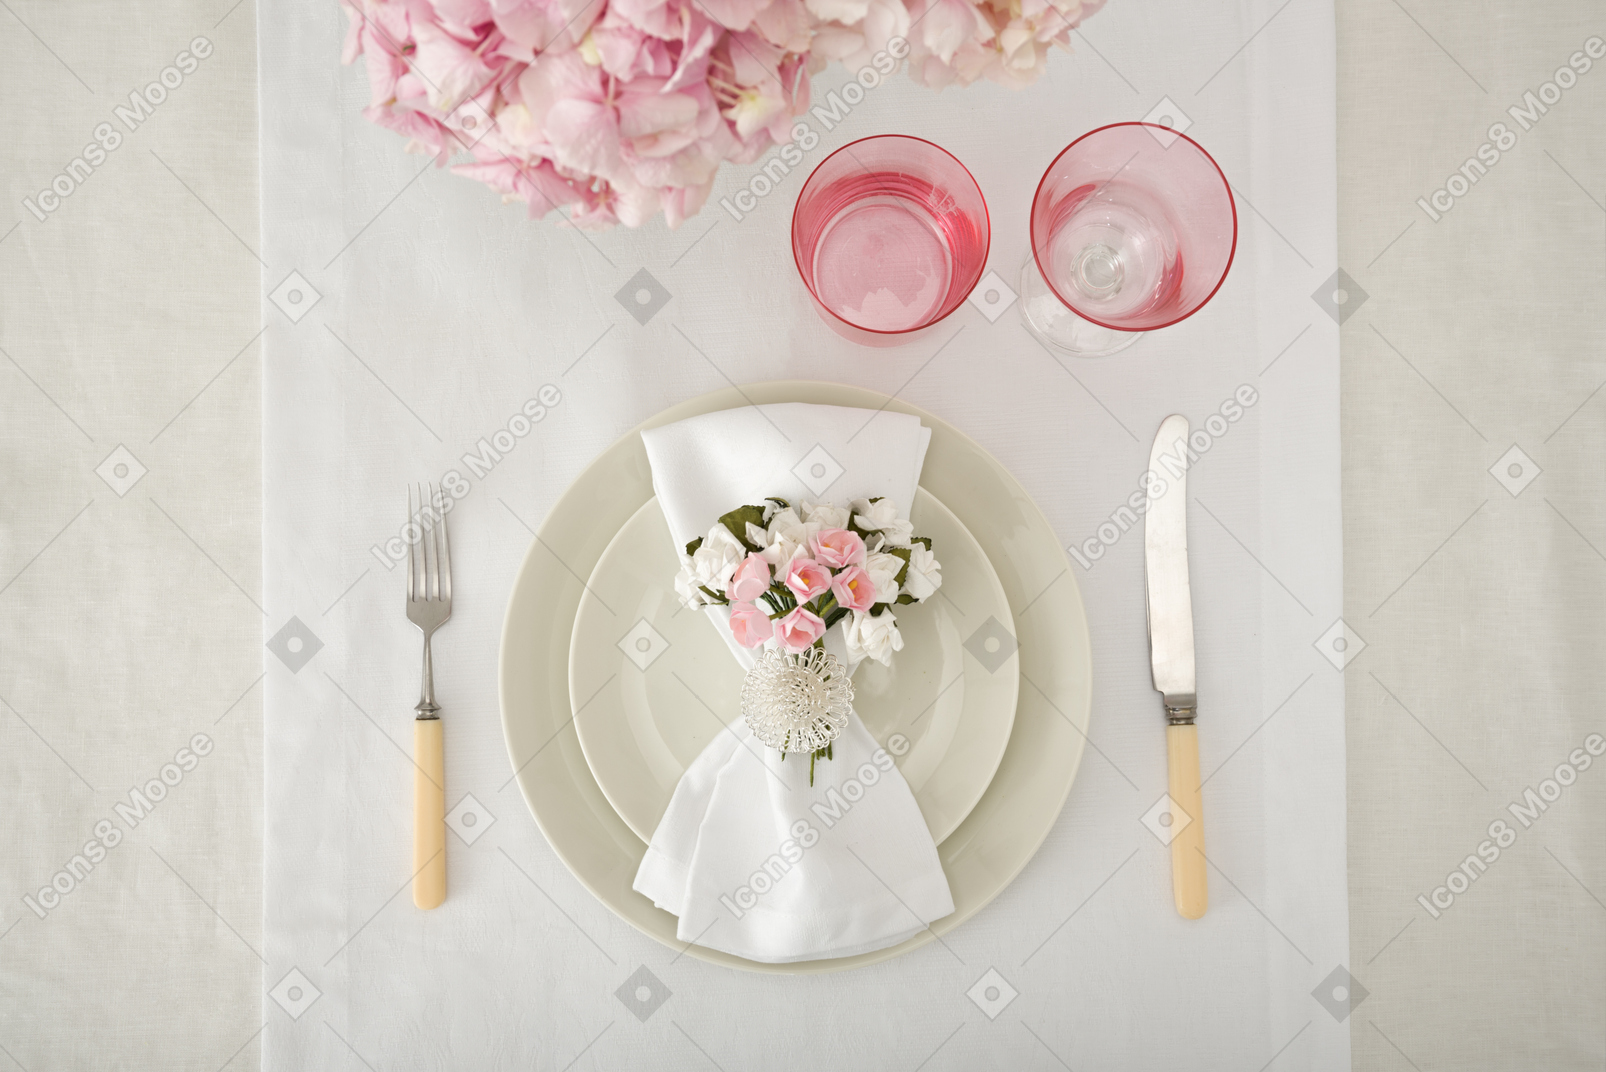 Wedding table served for the occasion